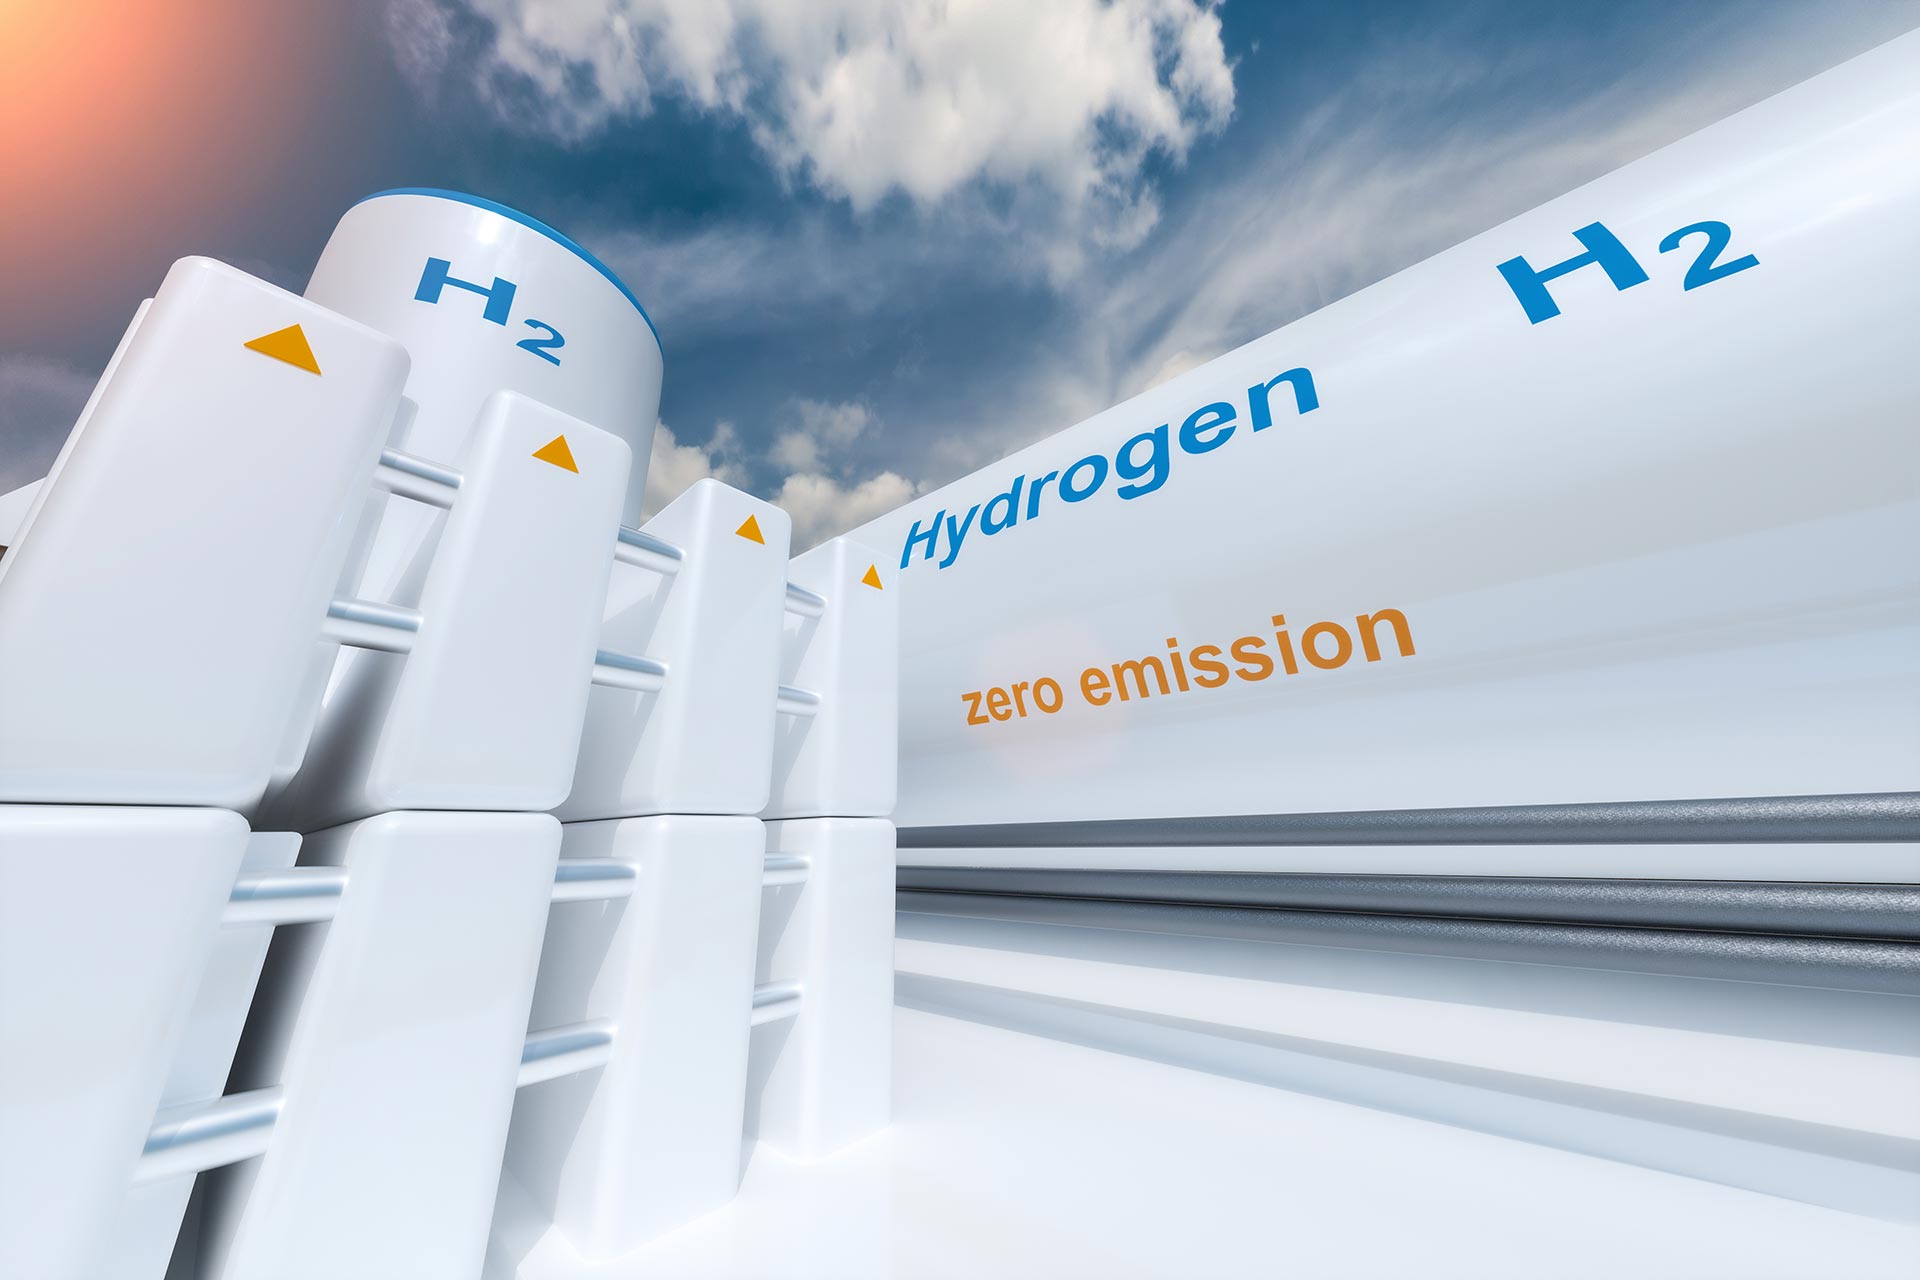 large white tanks for hydrogen production that read "H2 zero emission"